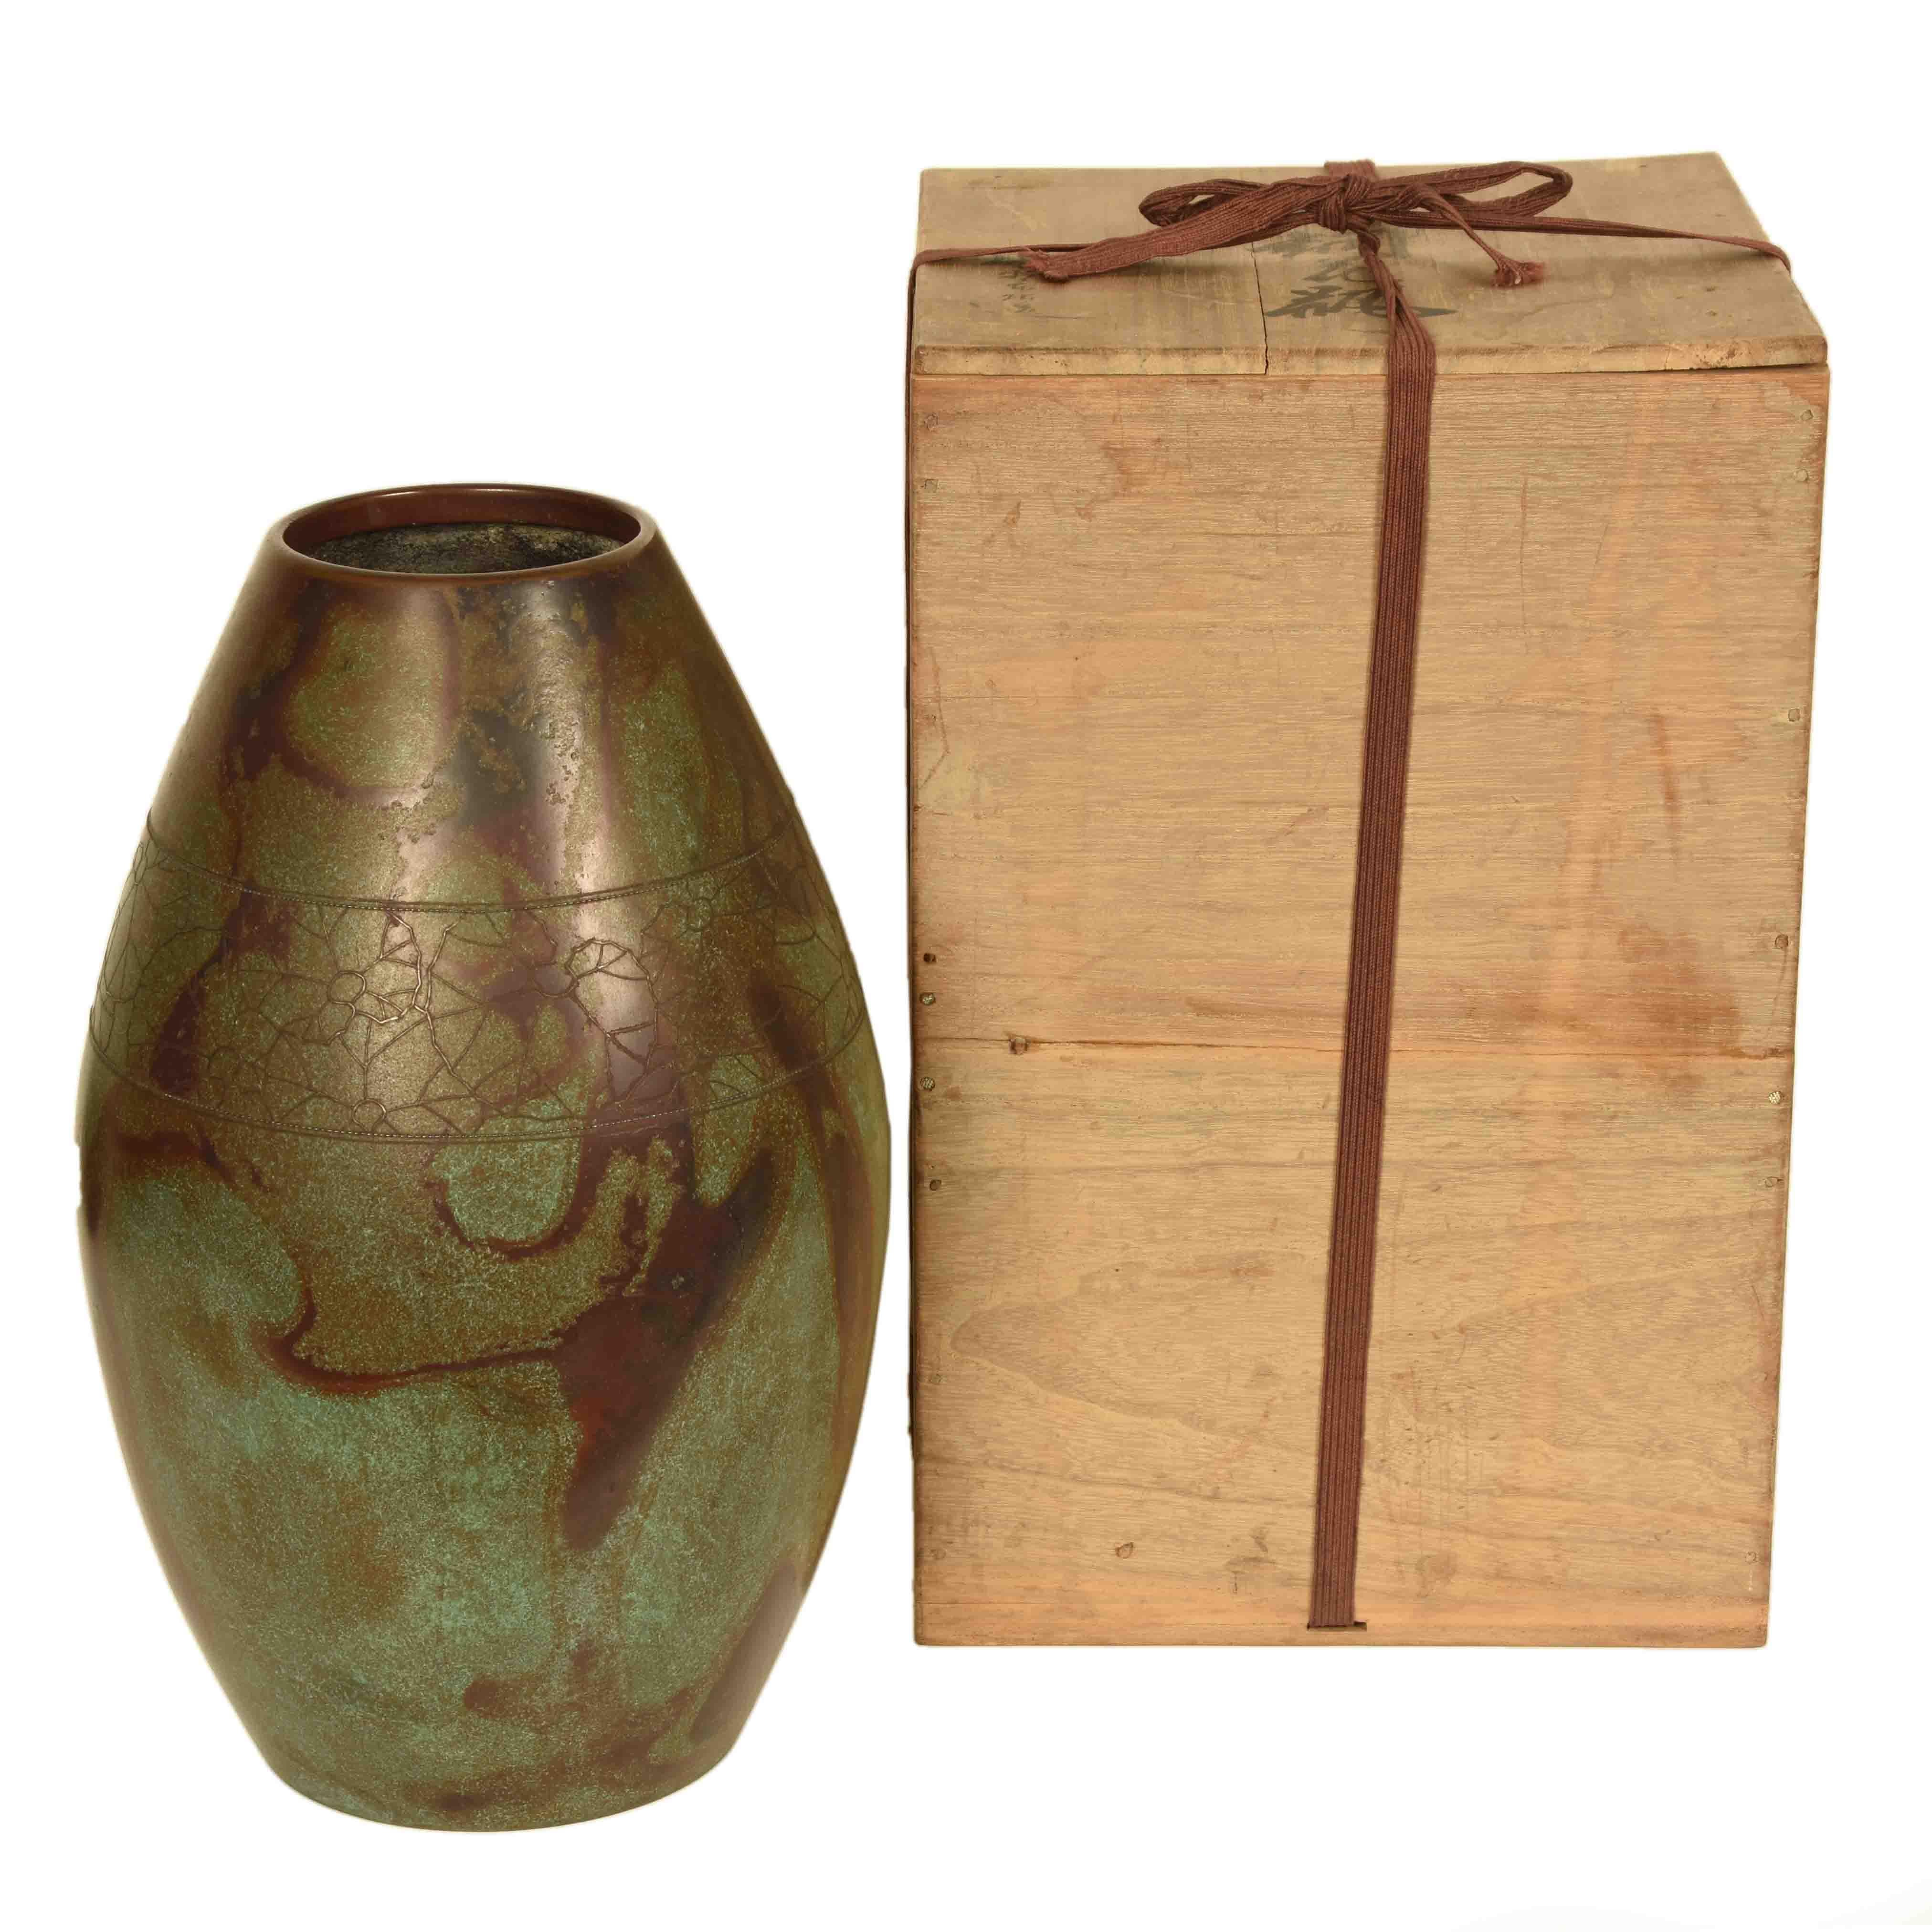 A vintage, Japanese bronze vase from Takaoka. Takaoka is a city on the main island of Honshu. While bronze work originated in China, Japanese artisans have developed an array of techniques in the production of decorative bronzes that have elevated